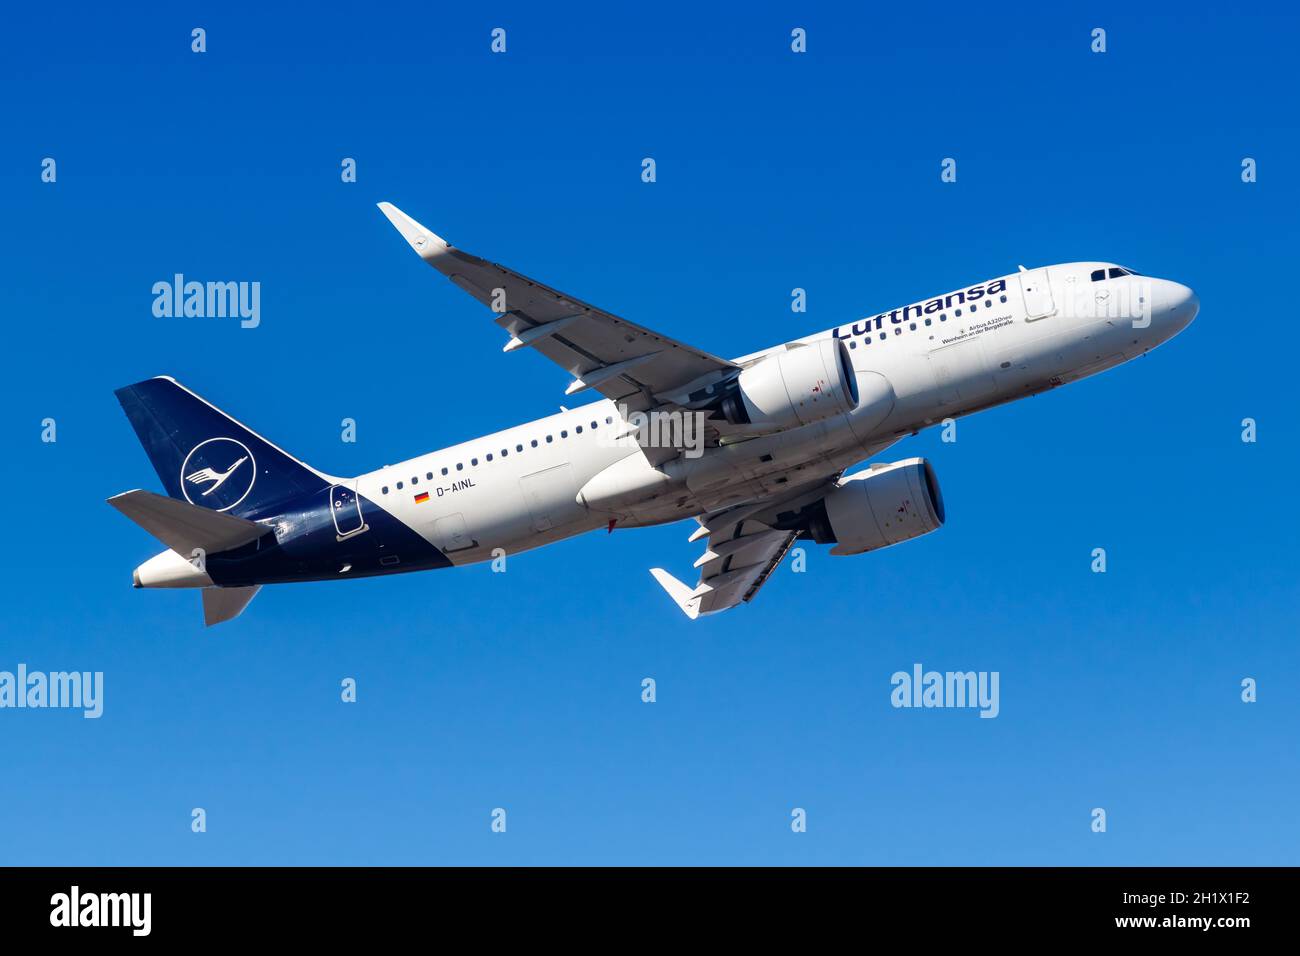 Frankfurt, Germany - February 13, 2021: Lufthansa Airbus A320neo airplane at Frankfurt Airport (FRA) in Germany. Airbus is a European aircraft manufac Stock Photo